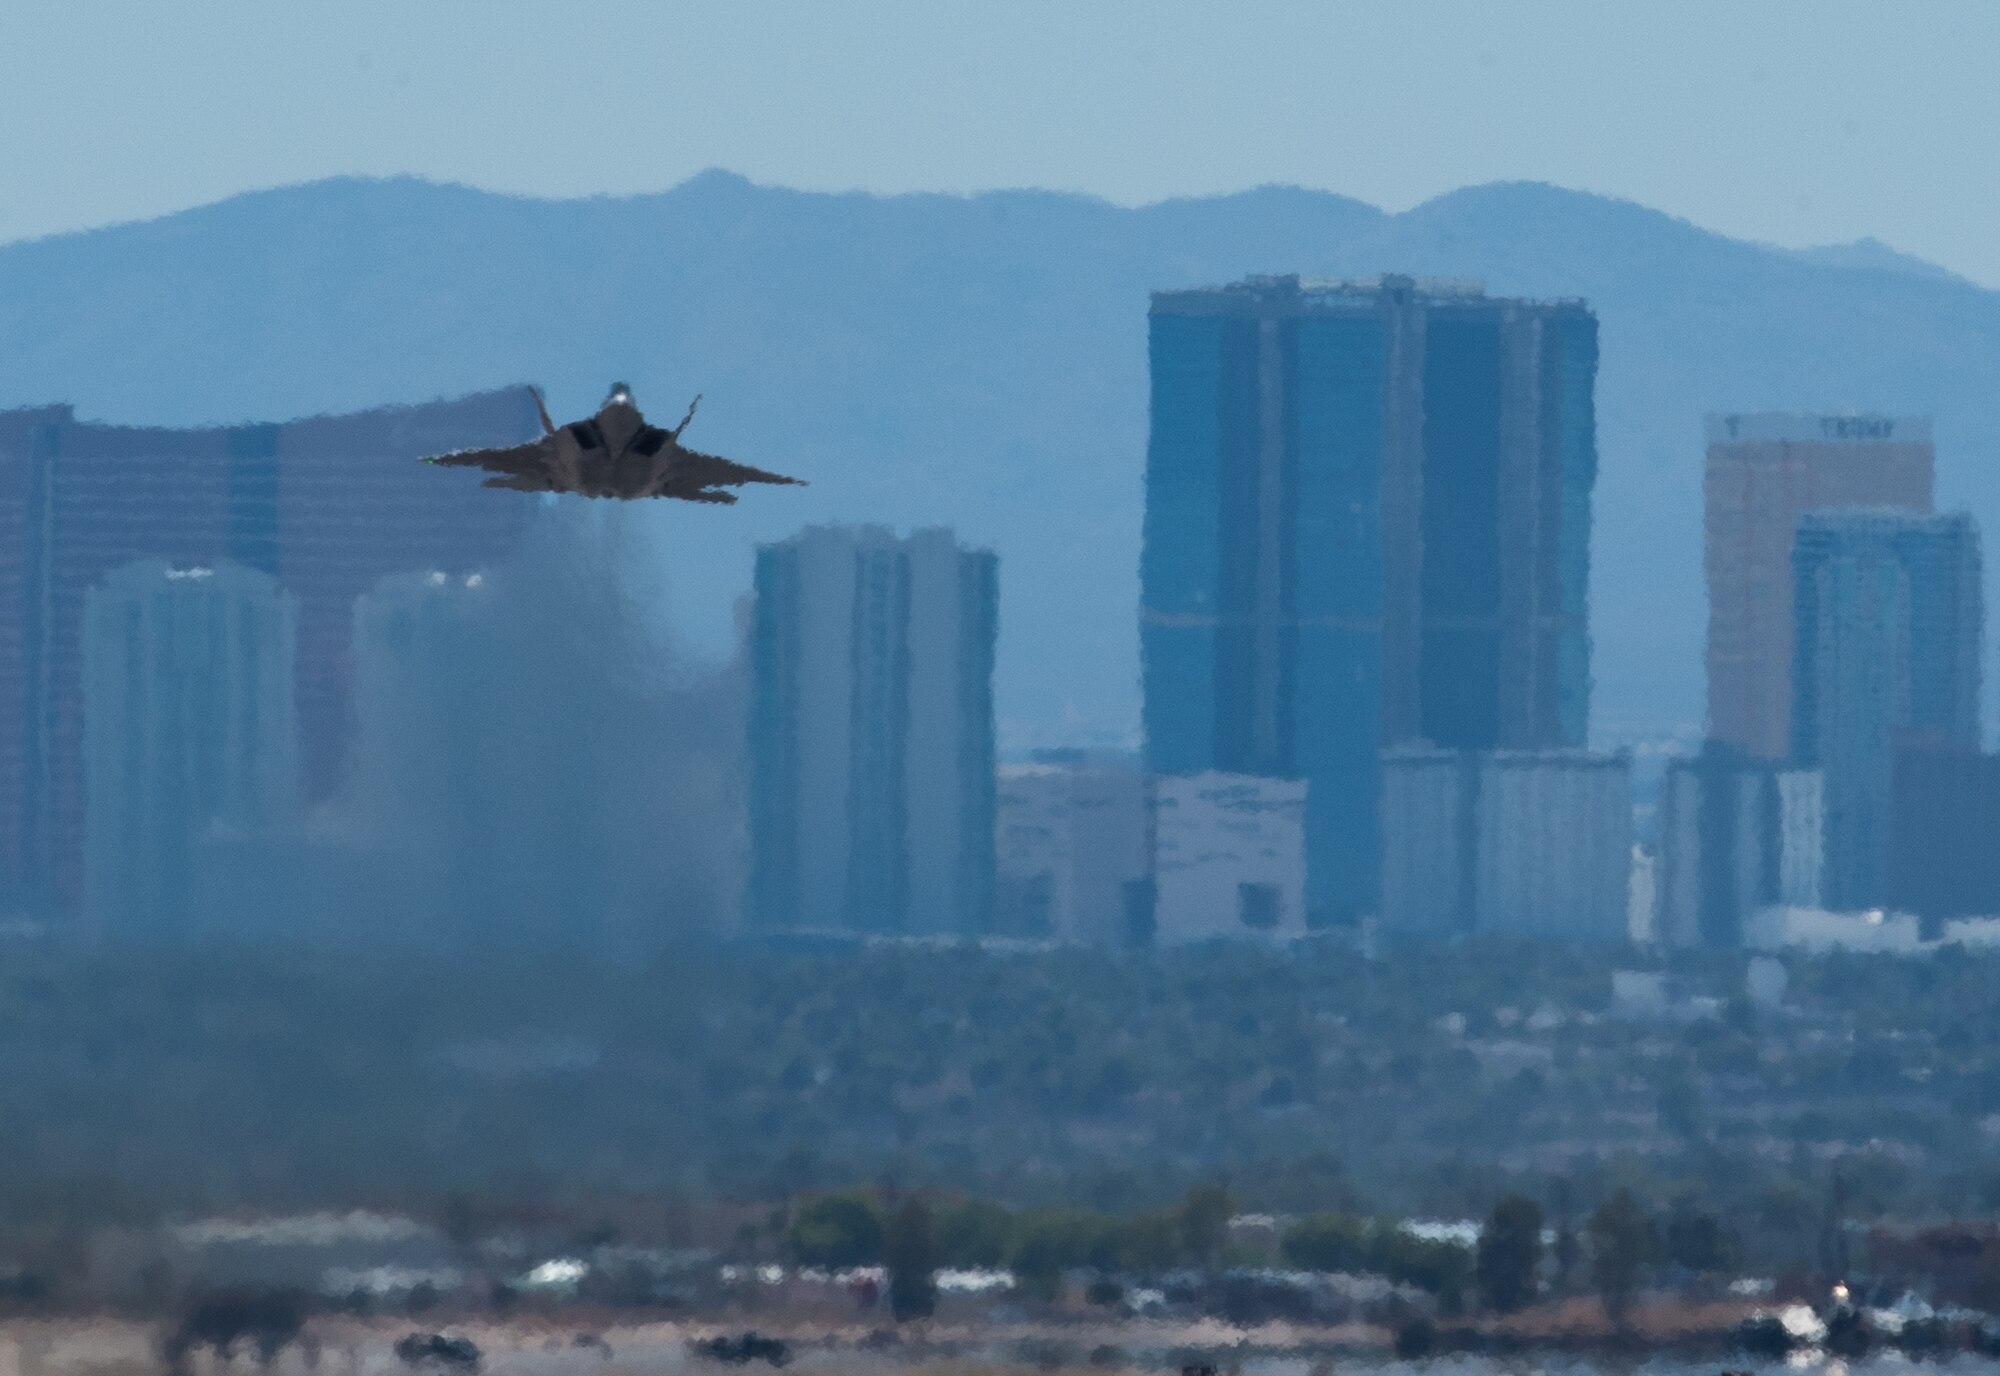 An 94th Fighter Squadron F-22 Raptor takes off with the Las Vegas, Nev. Skyline behind it during Red Flag 17-4 at Nellis Air Force Base, Nev., Aug. 17, 2017. (U.S. Air Force photo by Staff Sgt. Carlin Leslie)